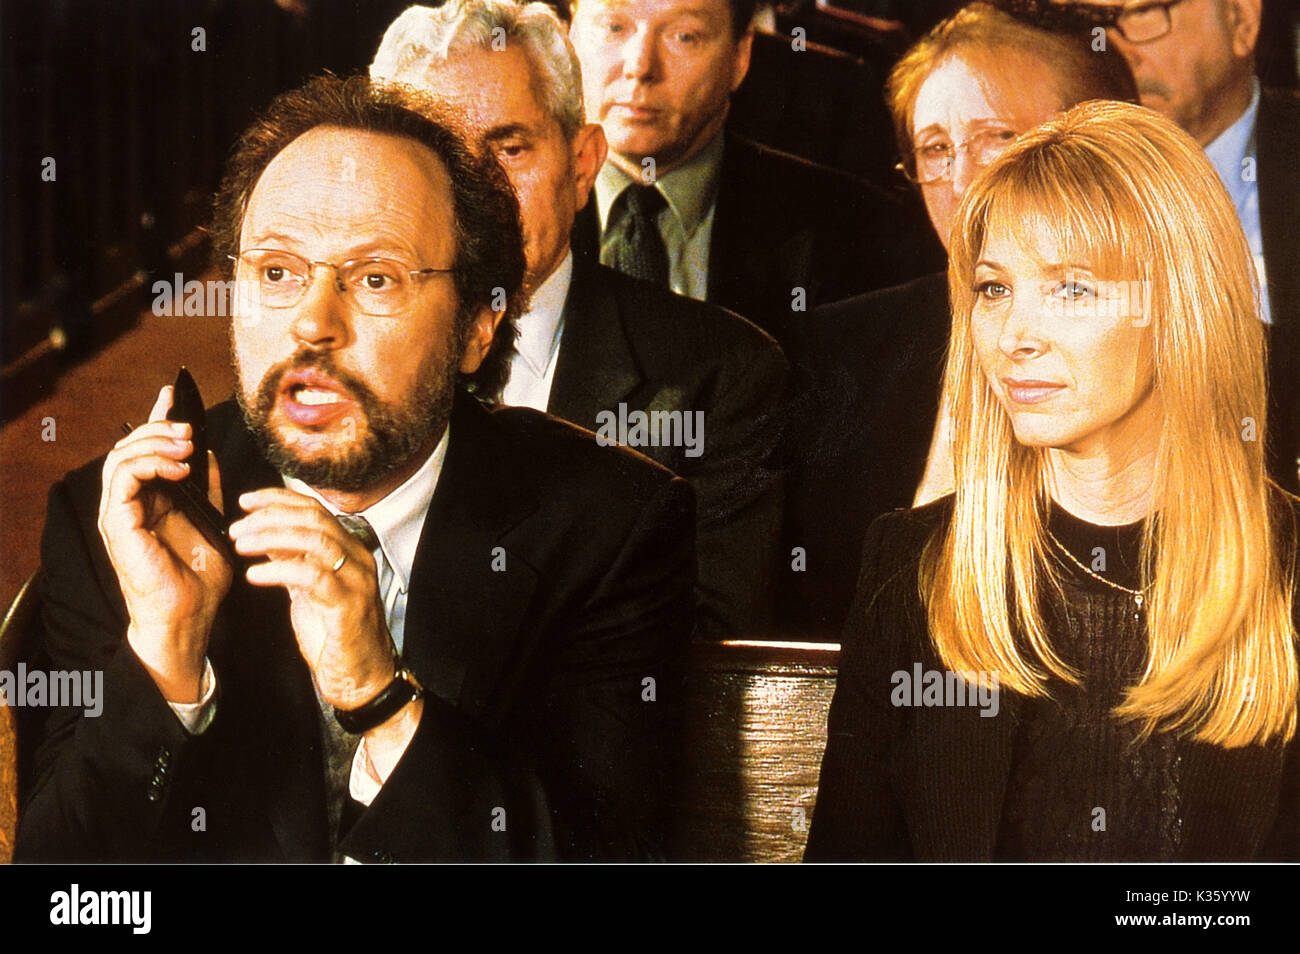 Analyser QUE BILLY CRYSTAL, Lisa Kudrow Date : 2002 Banque D'Images